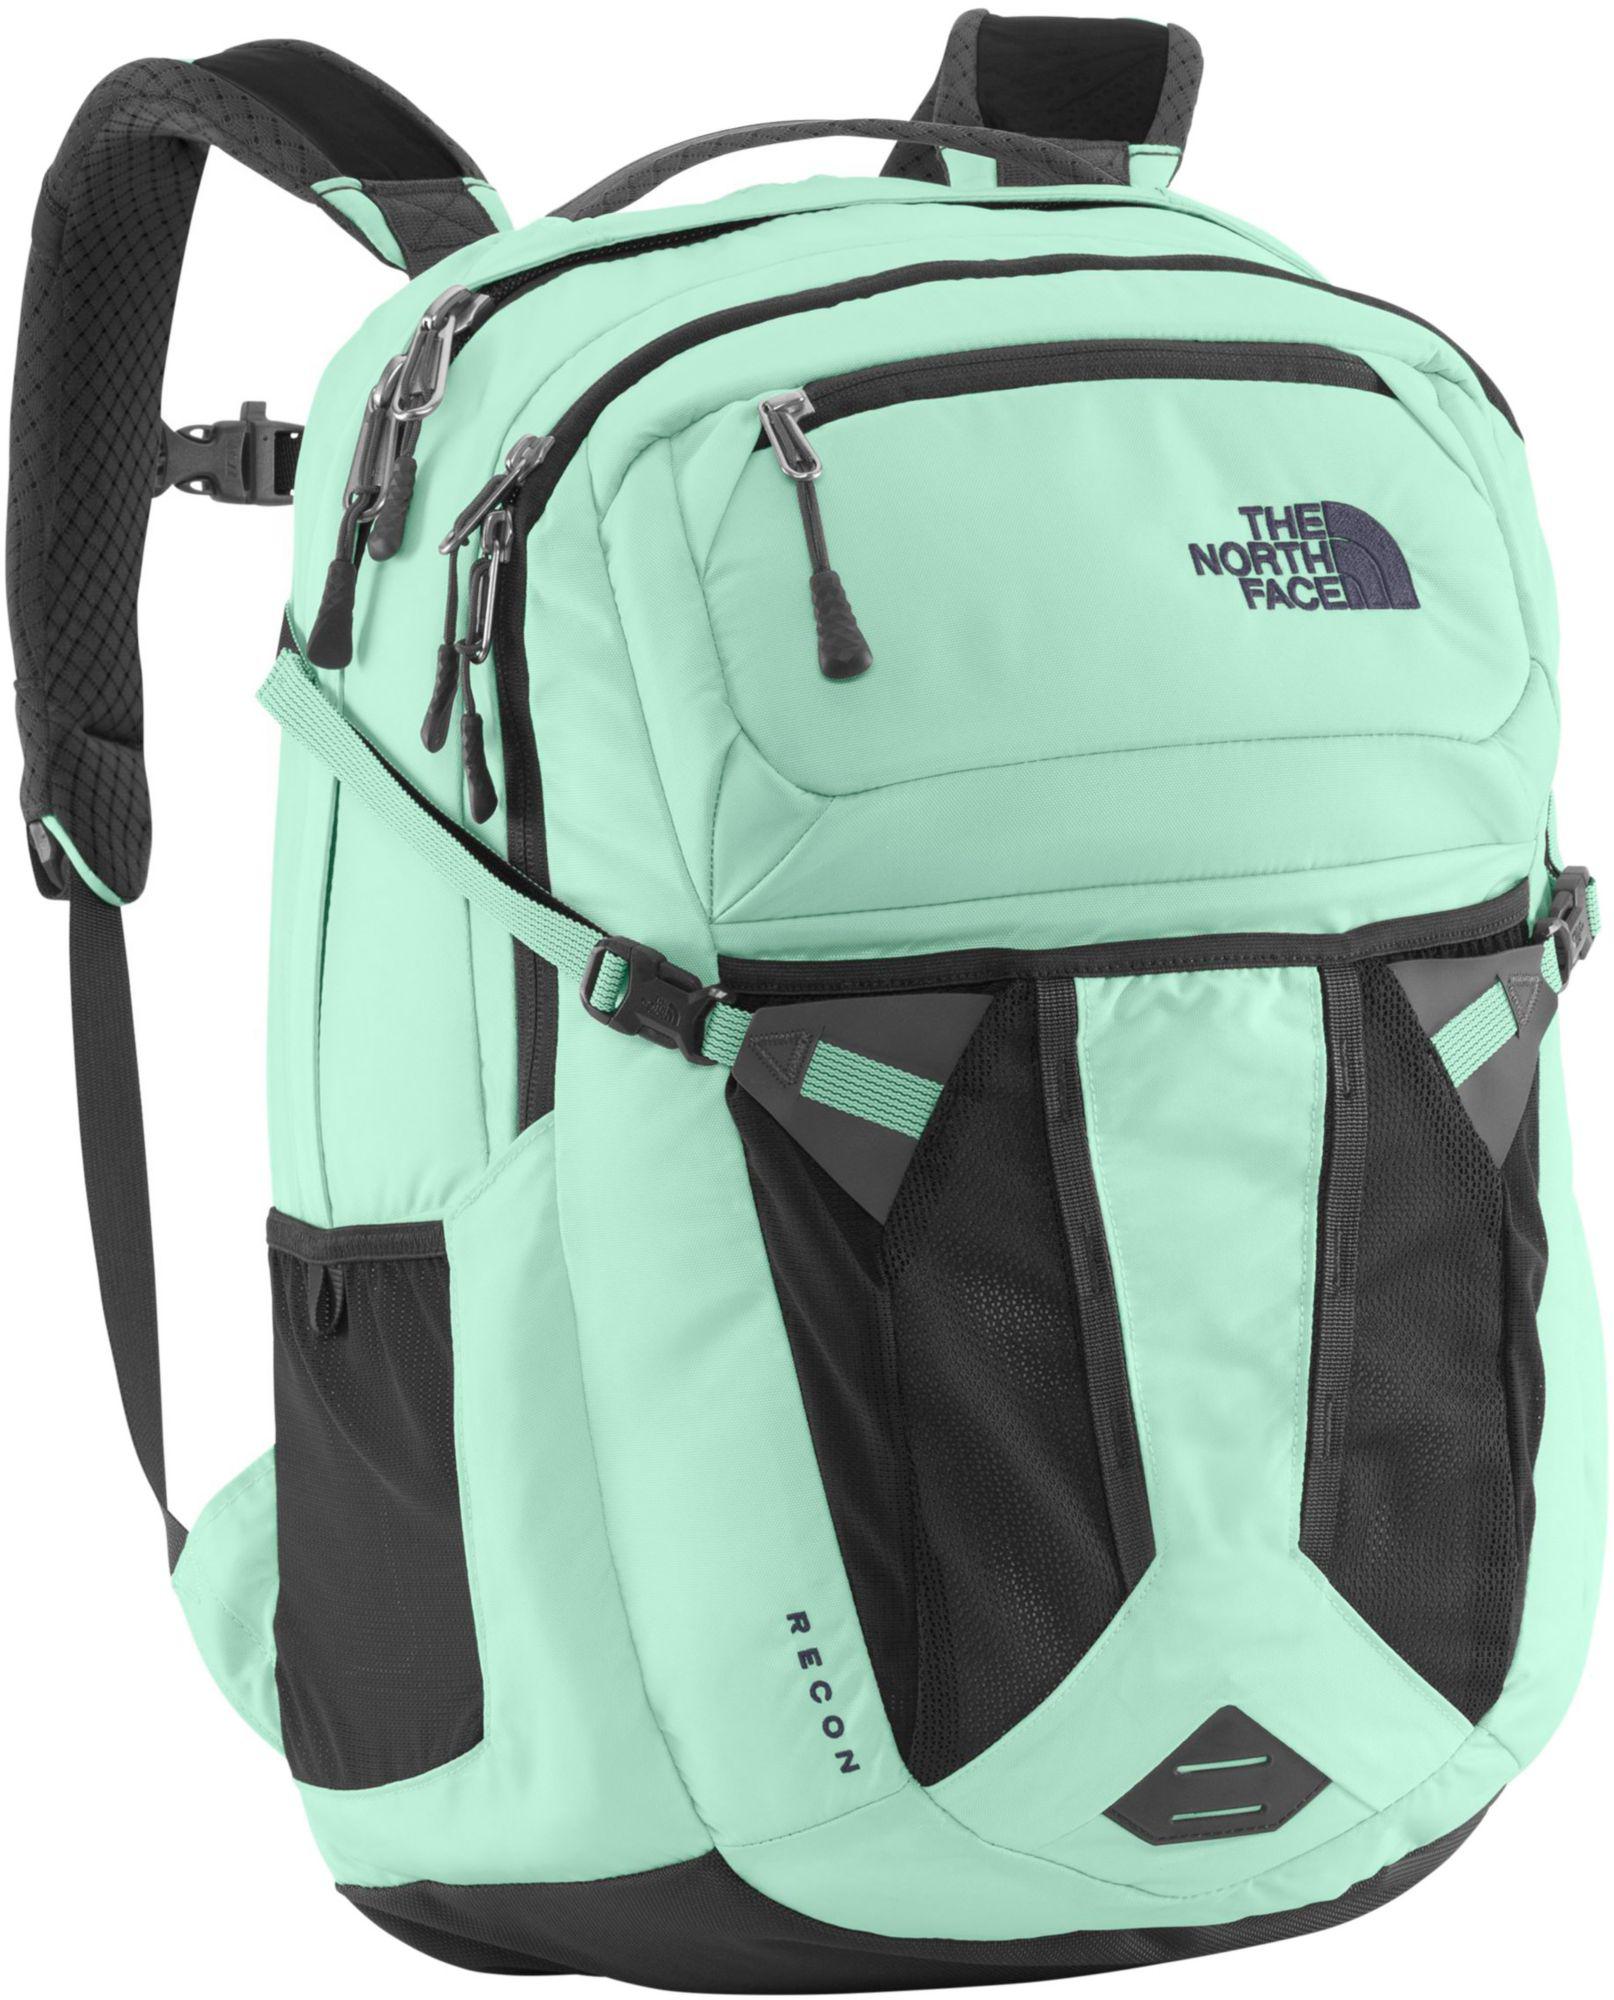 The North Face Fleece Recon Backpack in 